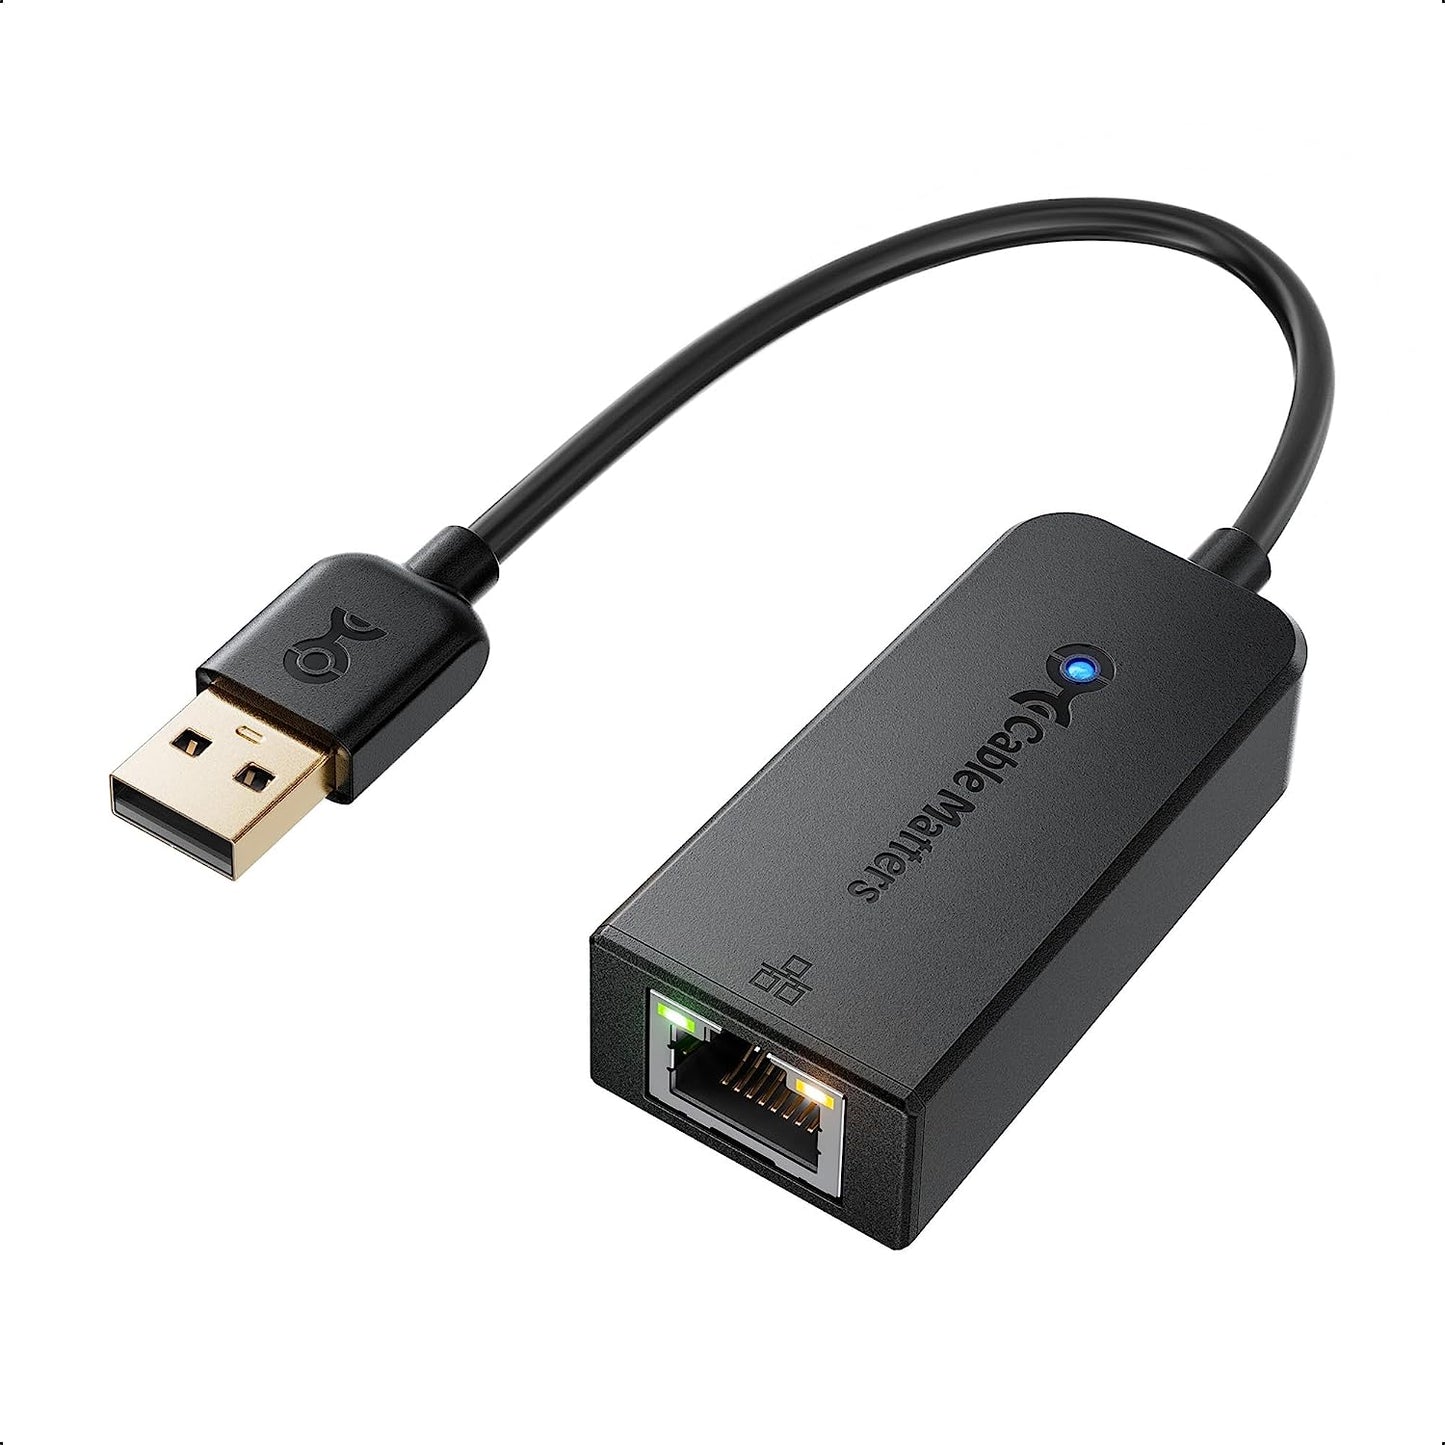 Cable Matters USB to Ethernet Adapter Supporting 10/100 Mbps Ethernet Network in Black